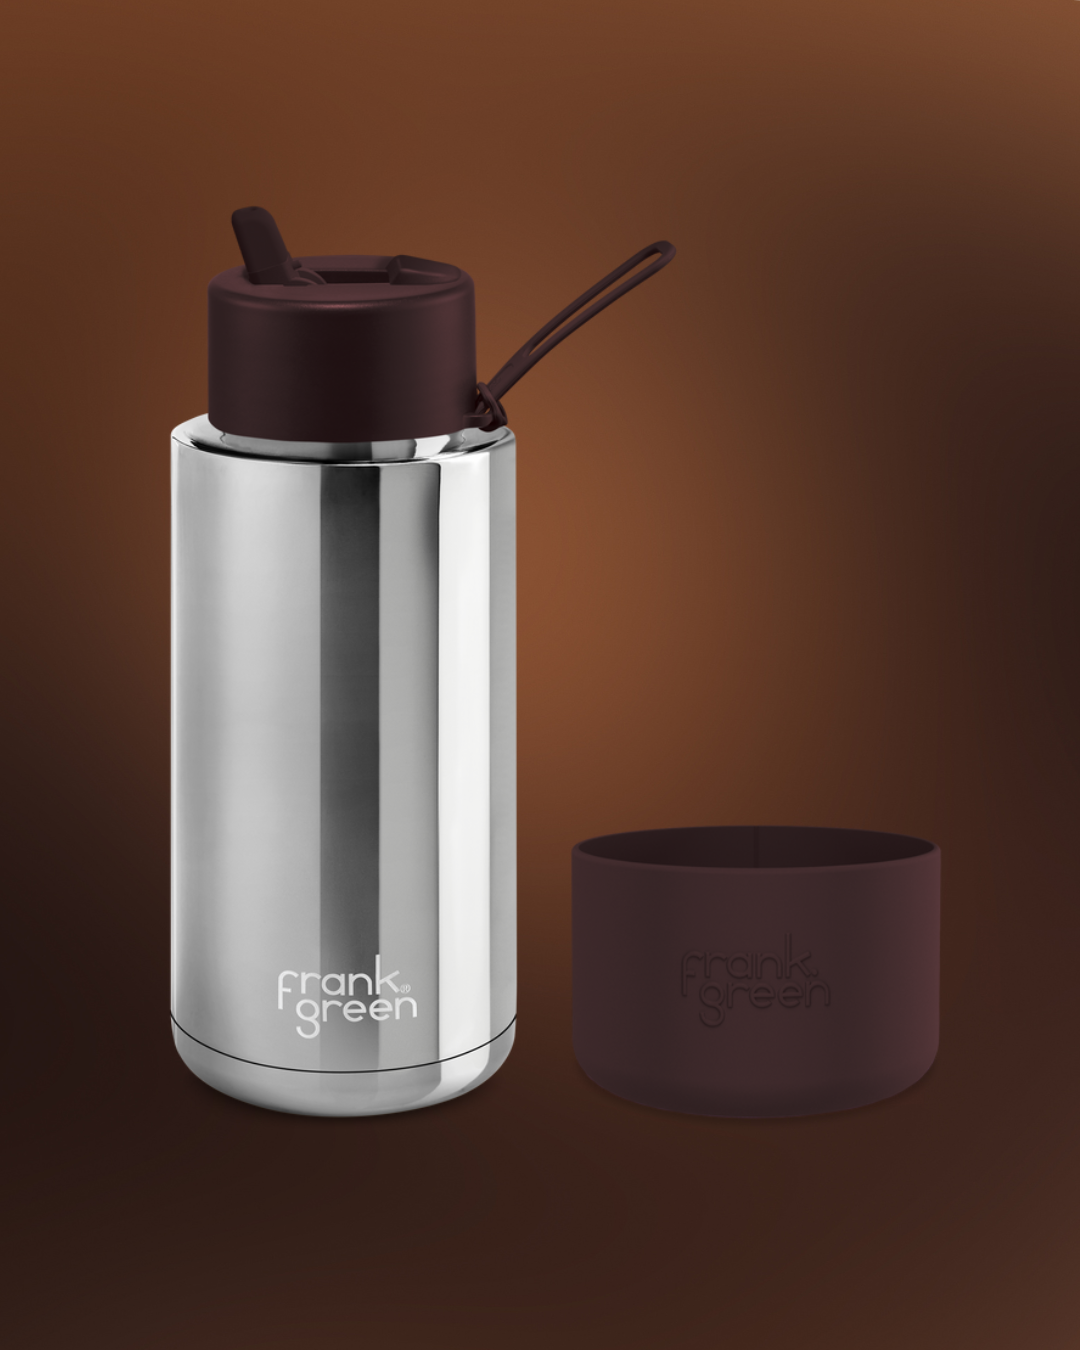 Stainless steel Frank Green water bottle with flip-top lid and matching cup, engraved with brand name